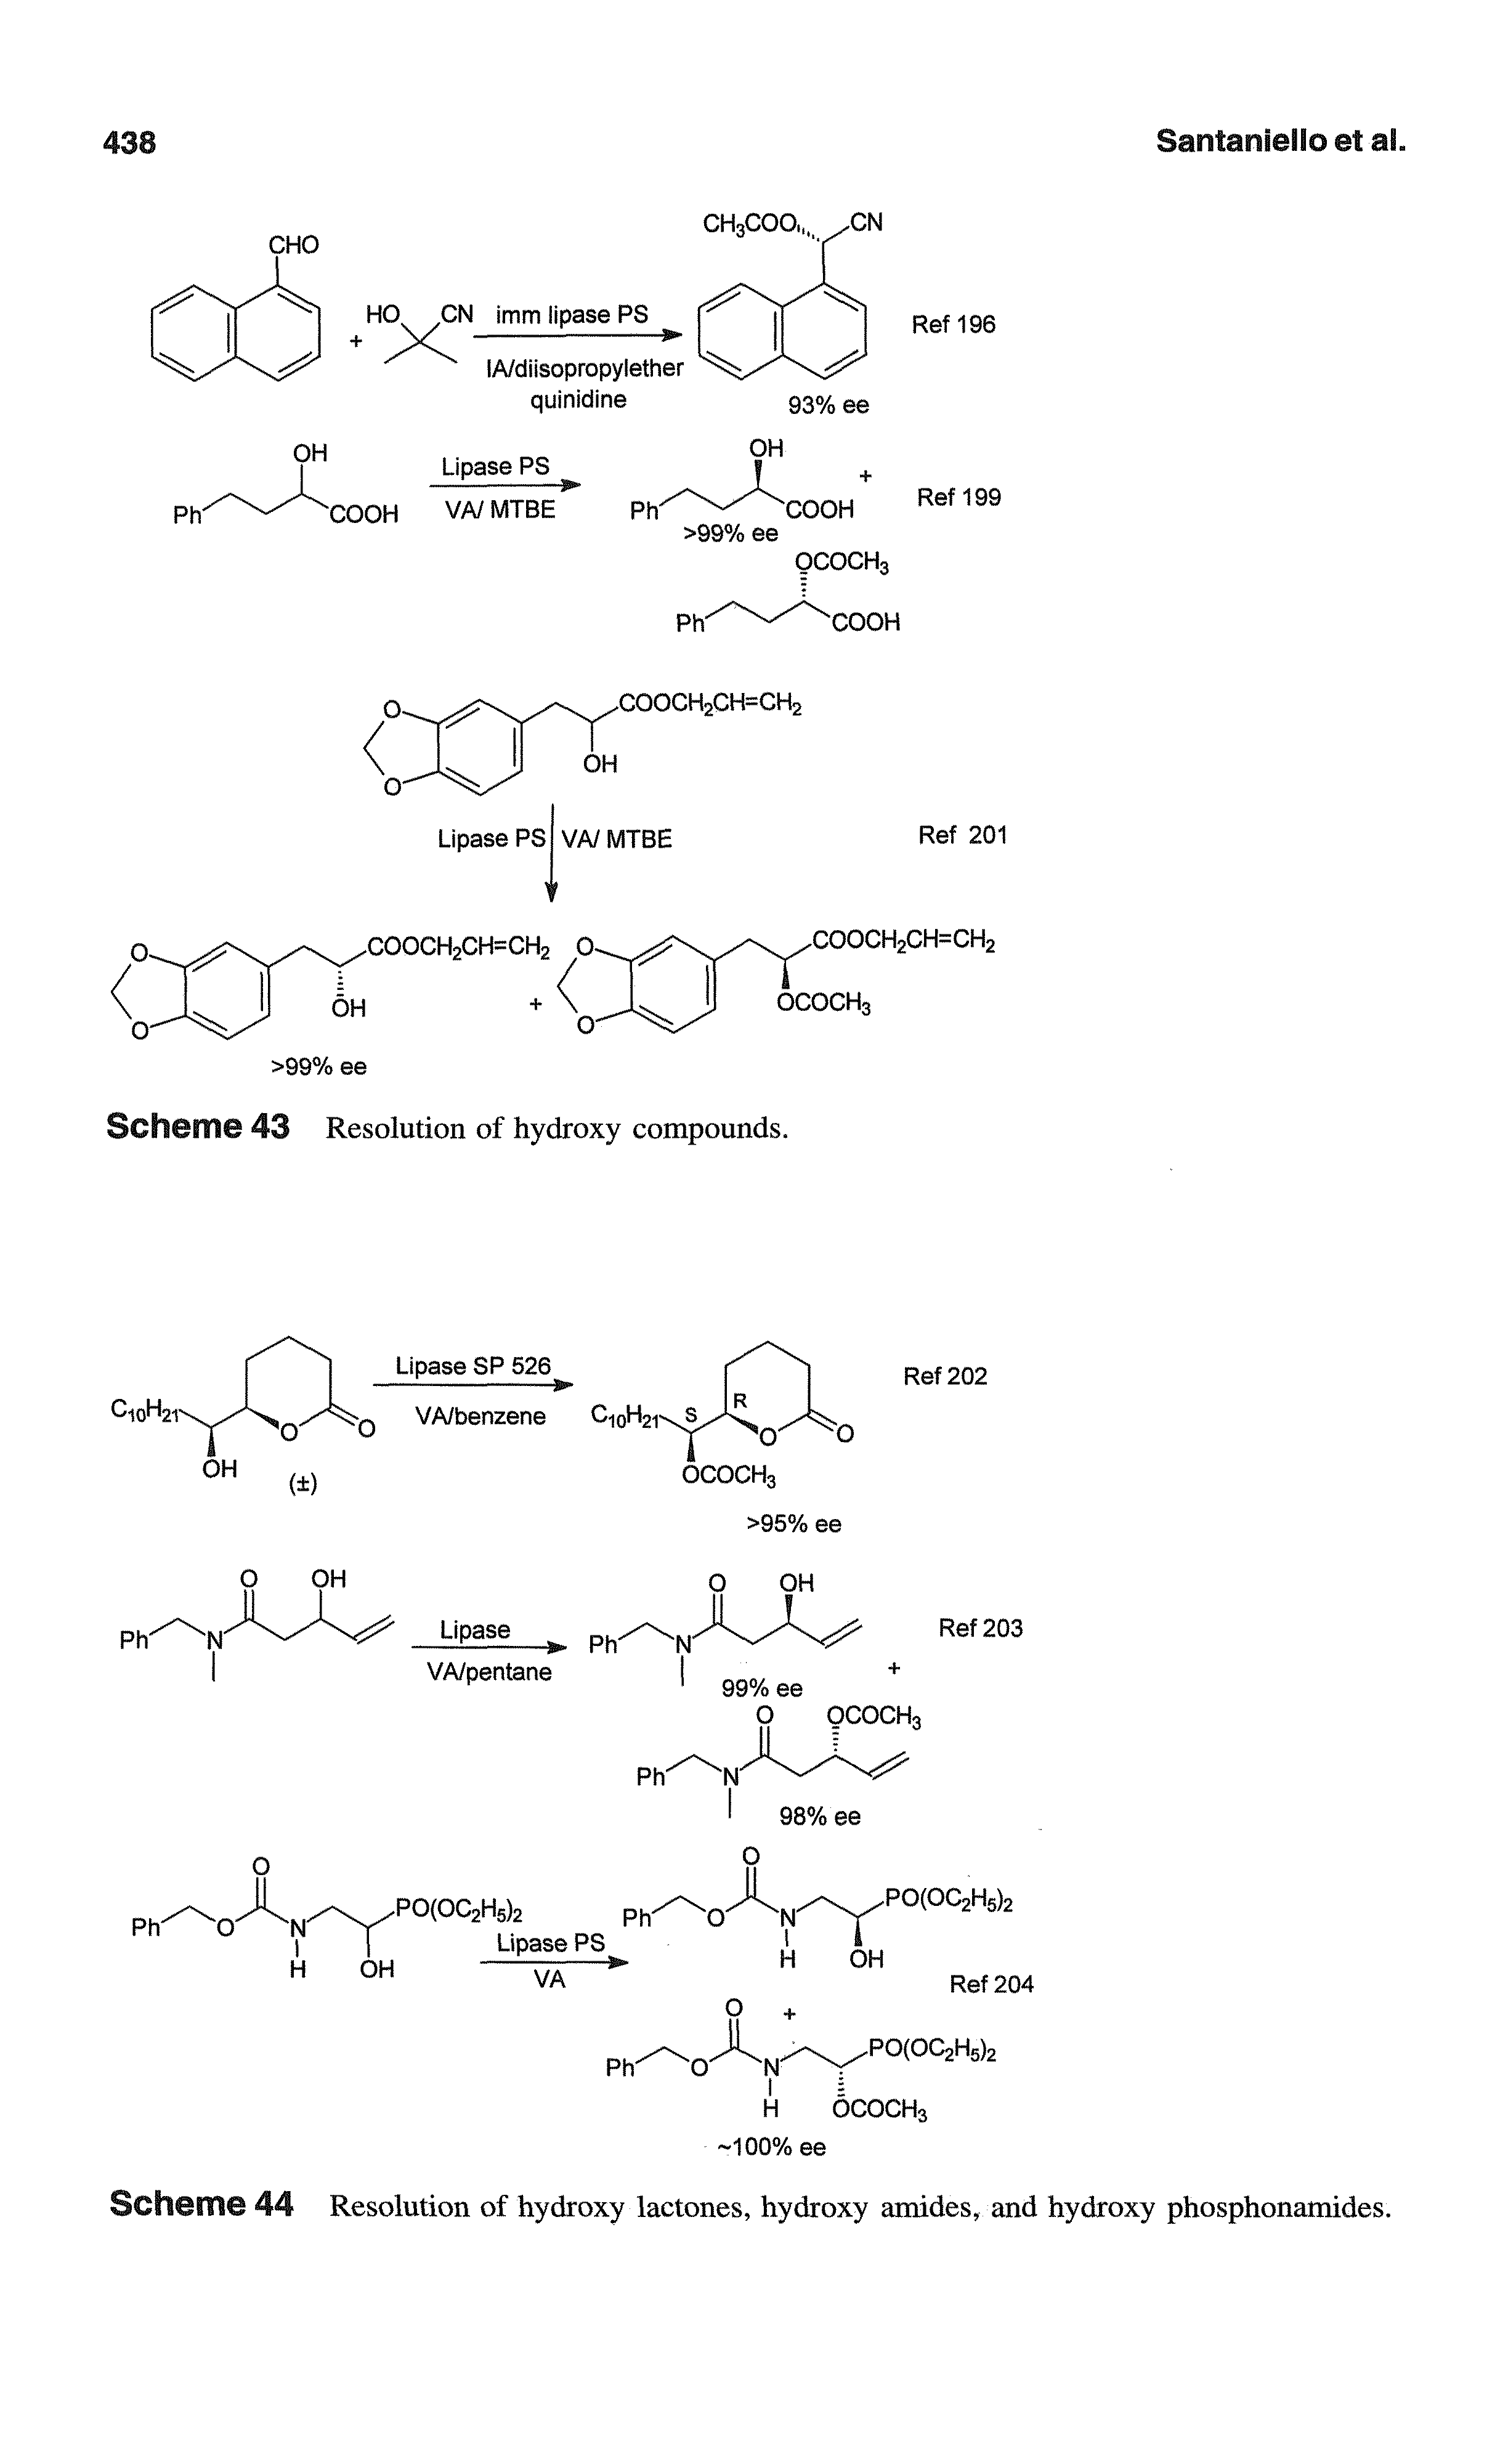 Scheme 44 Resolution of hydroxy lactones, hydroxy amides, and hydroxy phosphonamides.